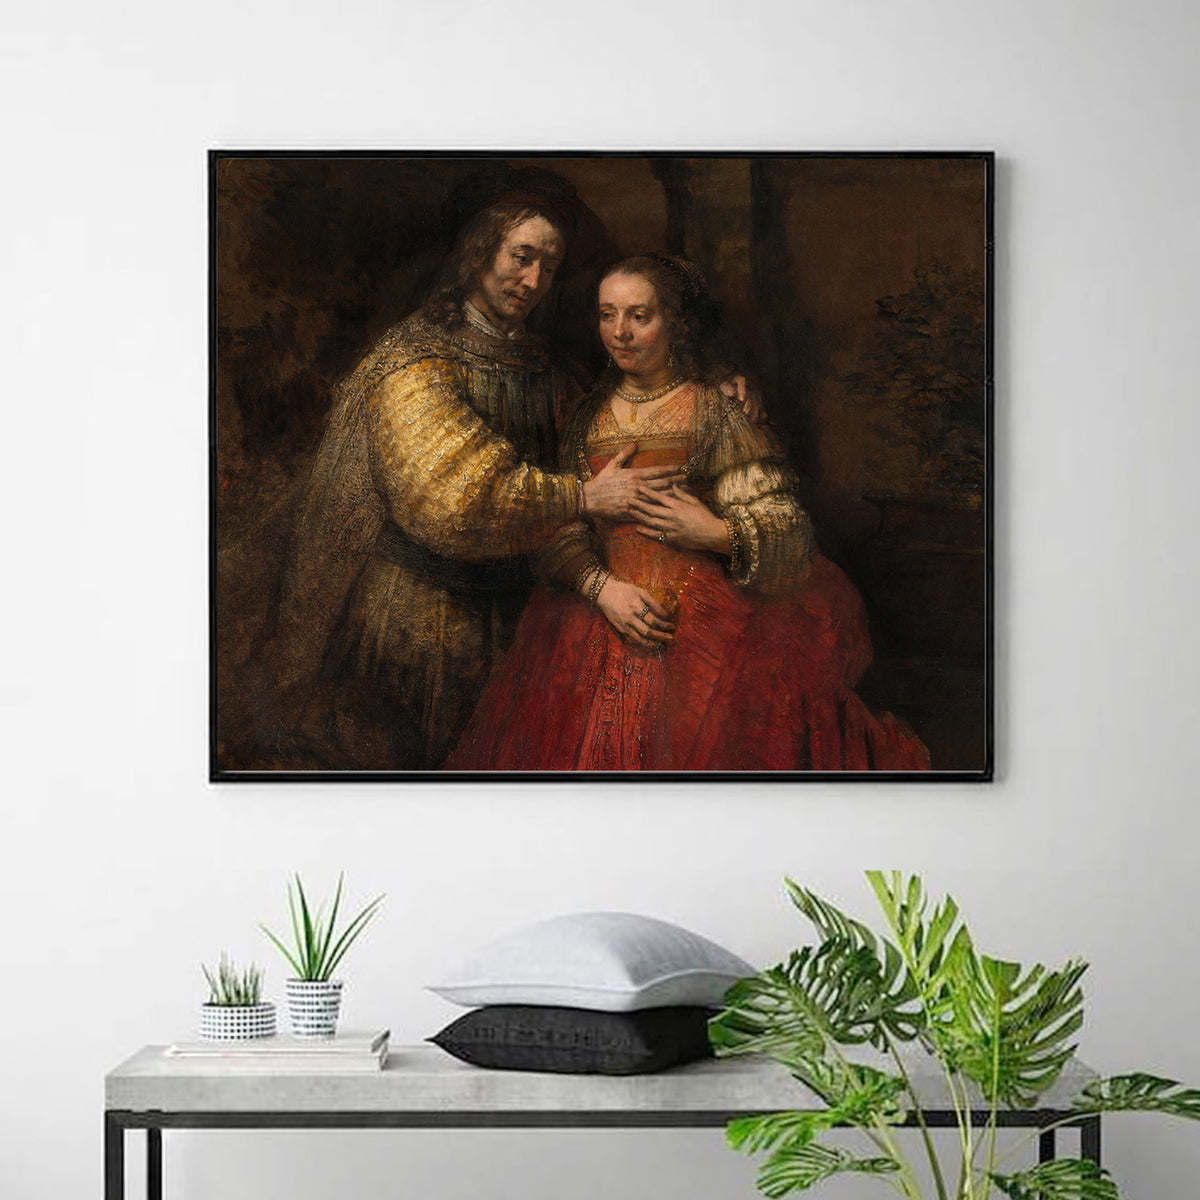 Portrait of a couple as figures from the Old Testament by Rembrandt Harmenszoon van Rijn